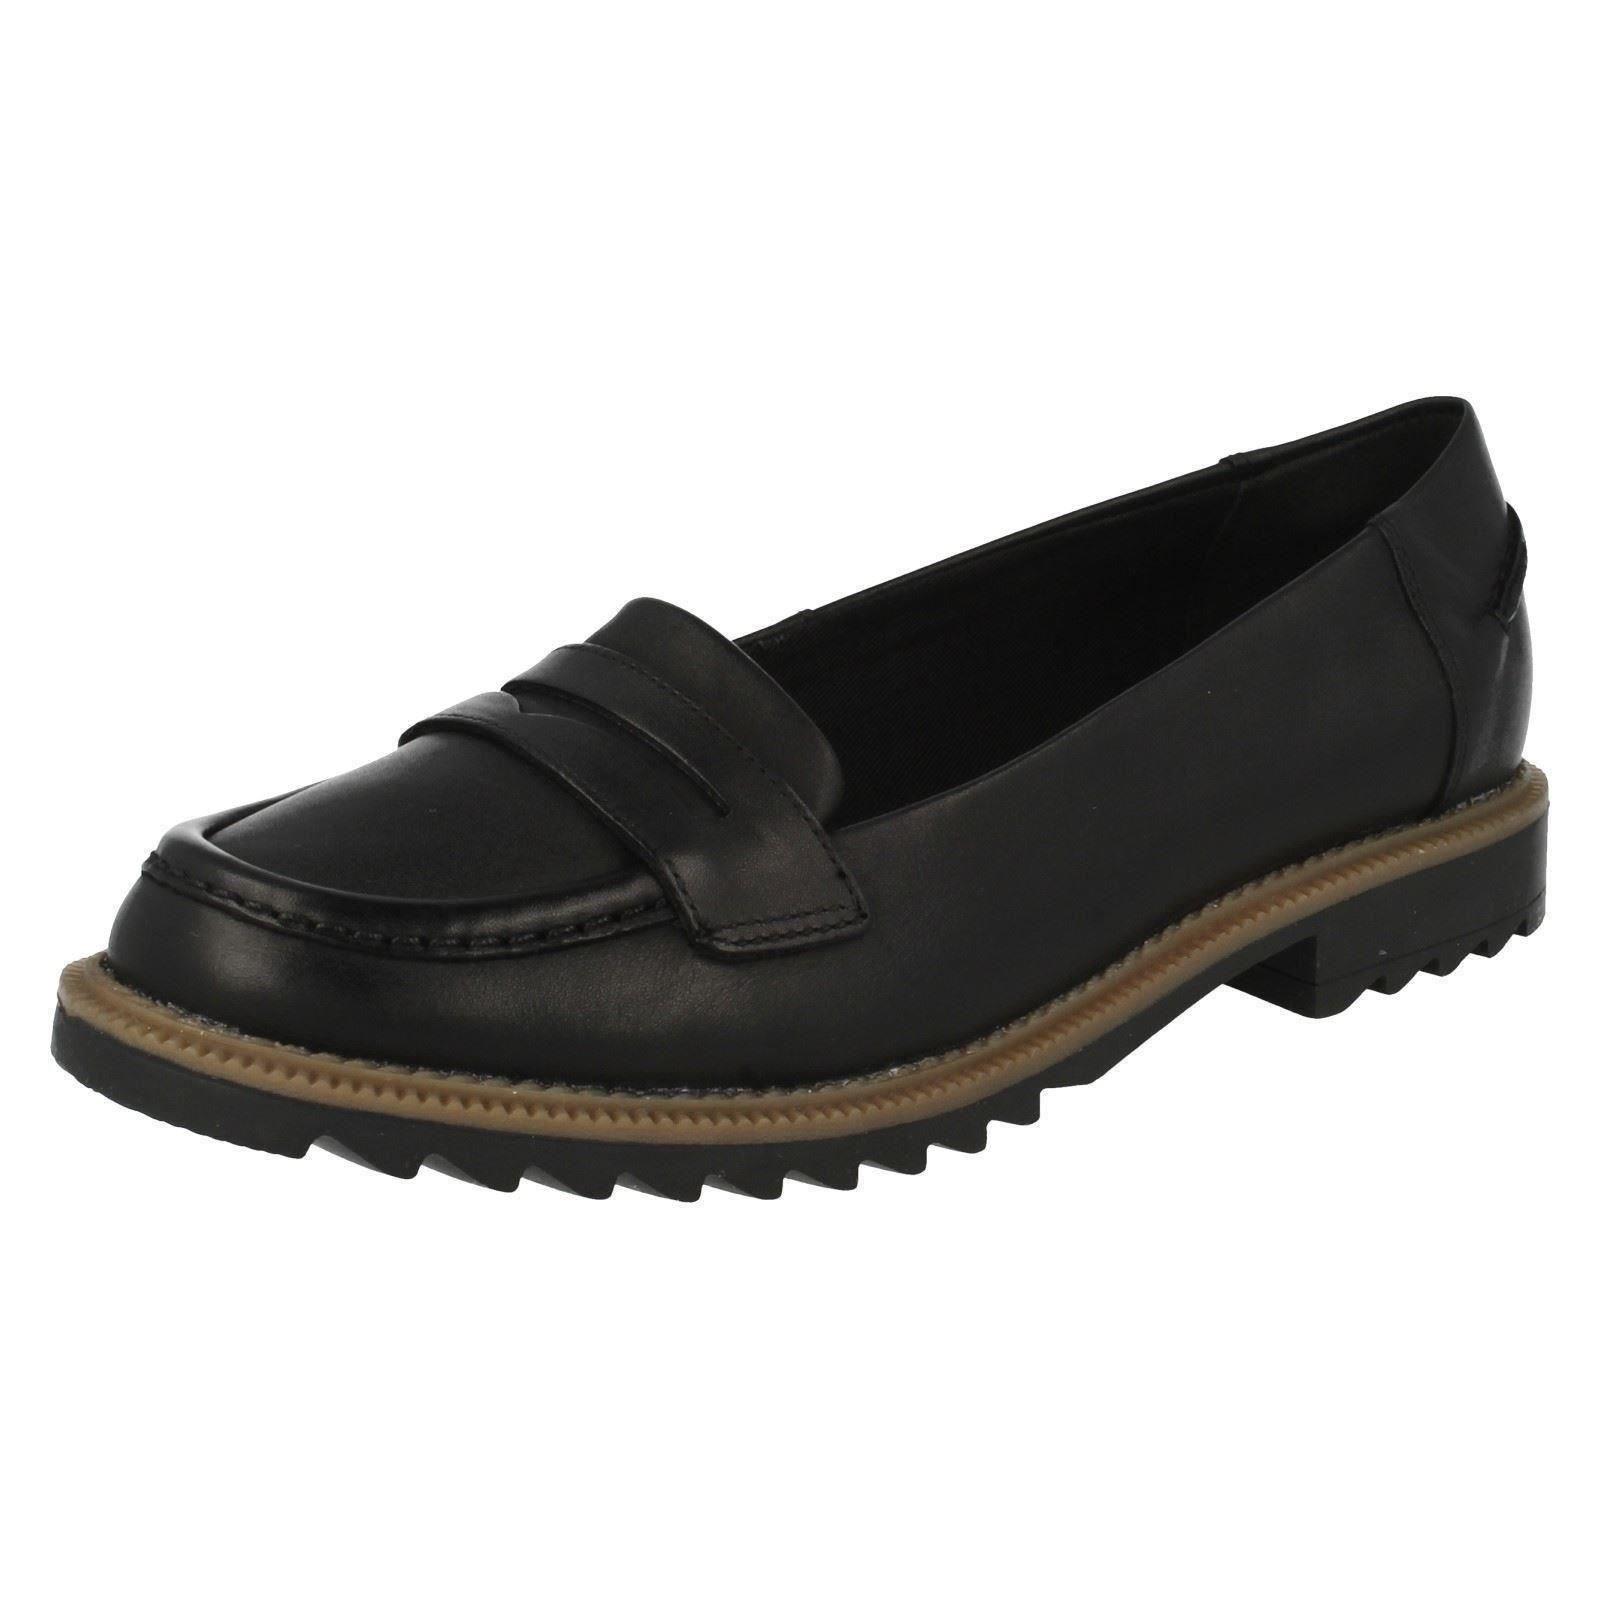 clarks griffin milly black leather